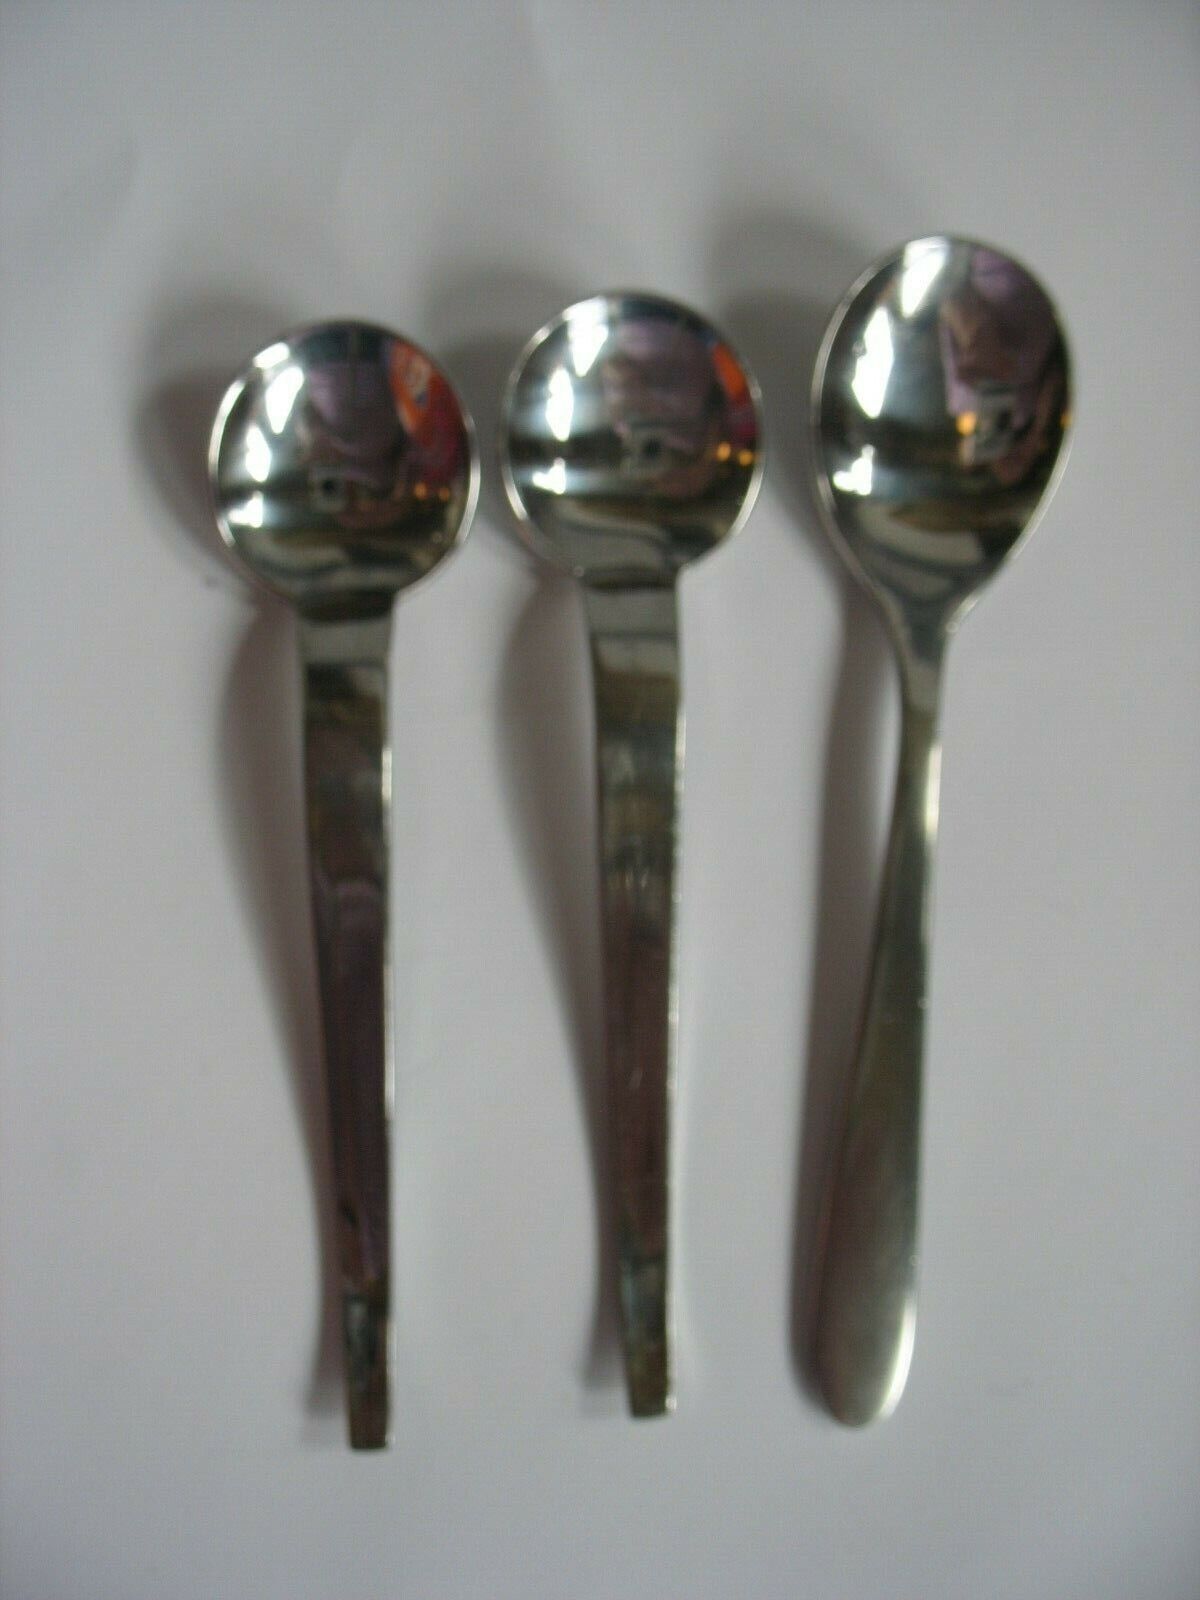 Vintage S/3 SWISSAIR stainless spoons Airline advertising travel flatware 